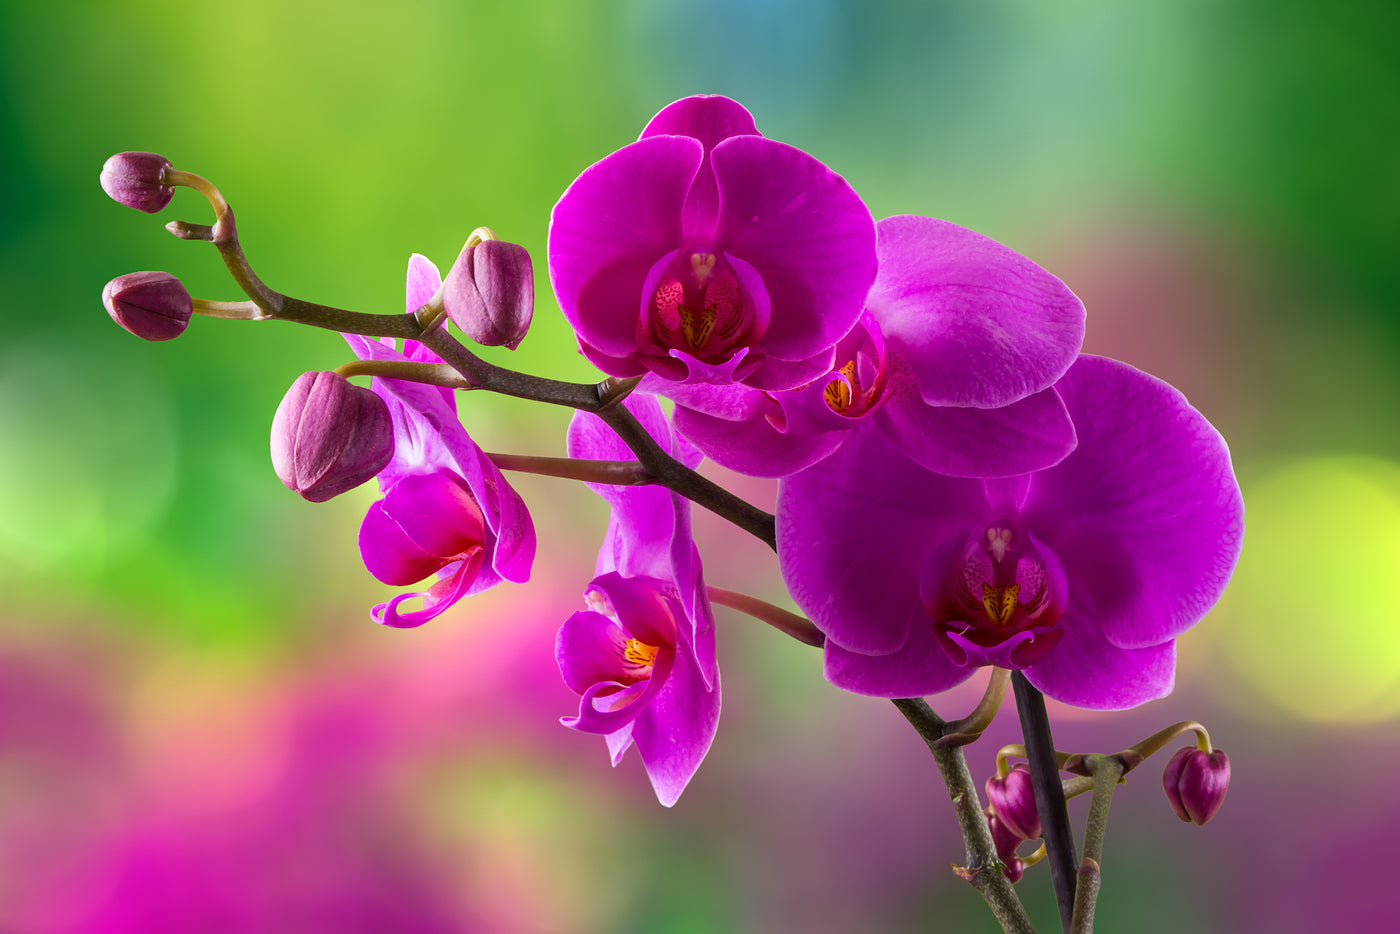 How To Properly Care for an Orchid Plant